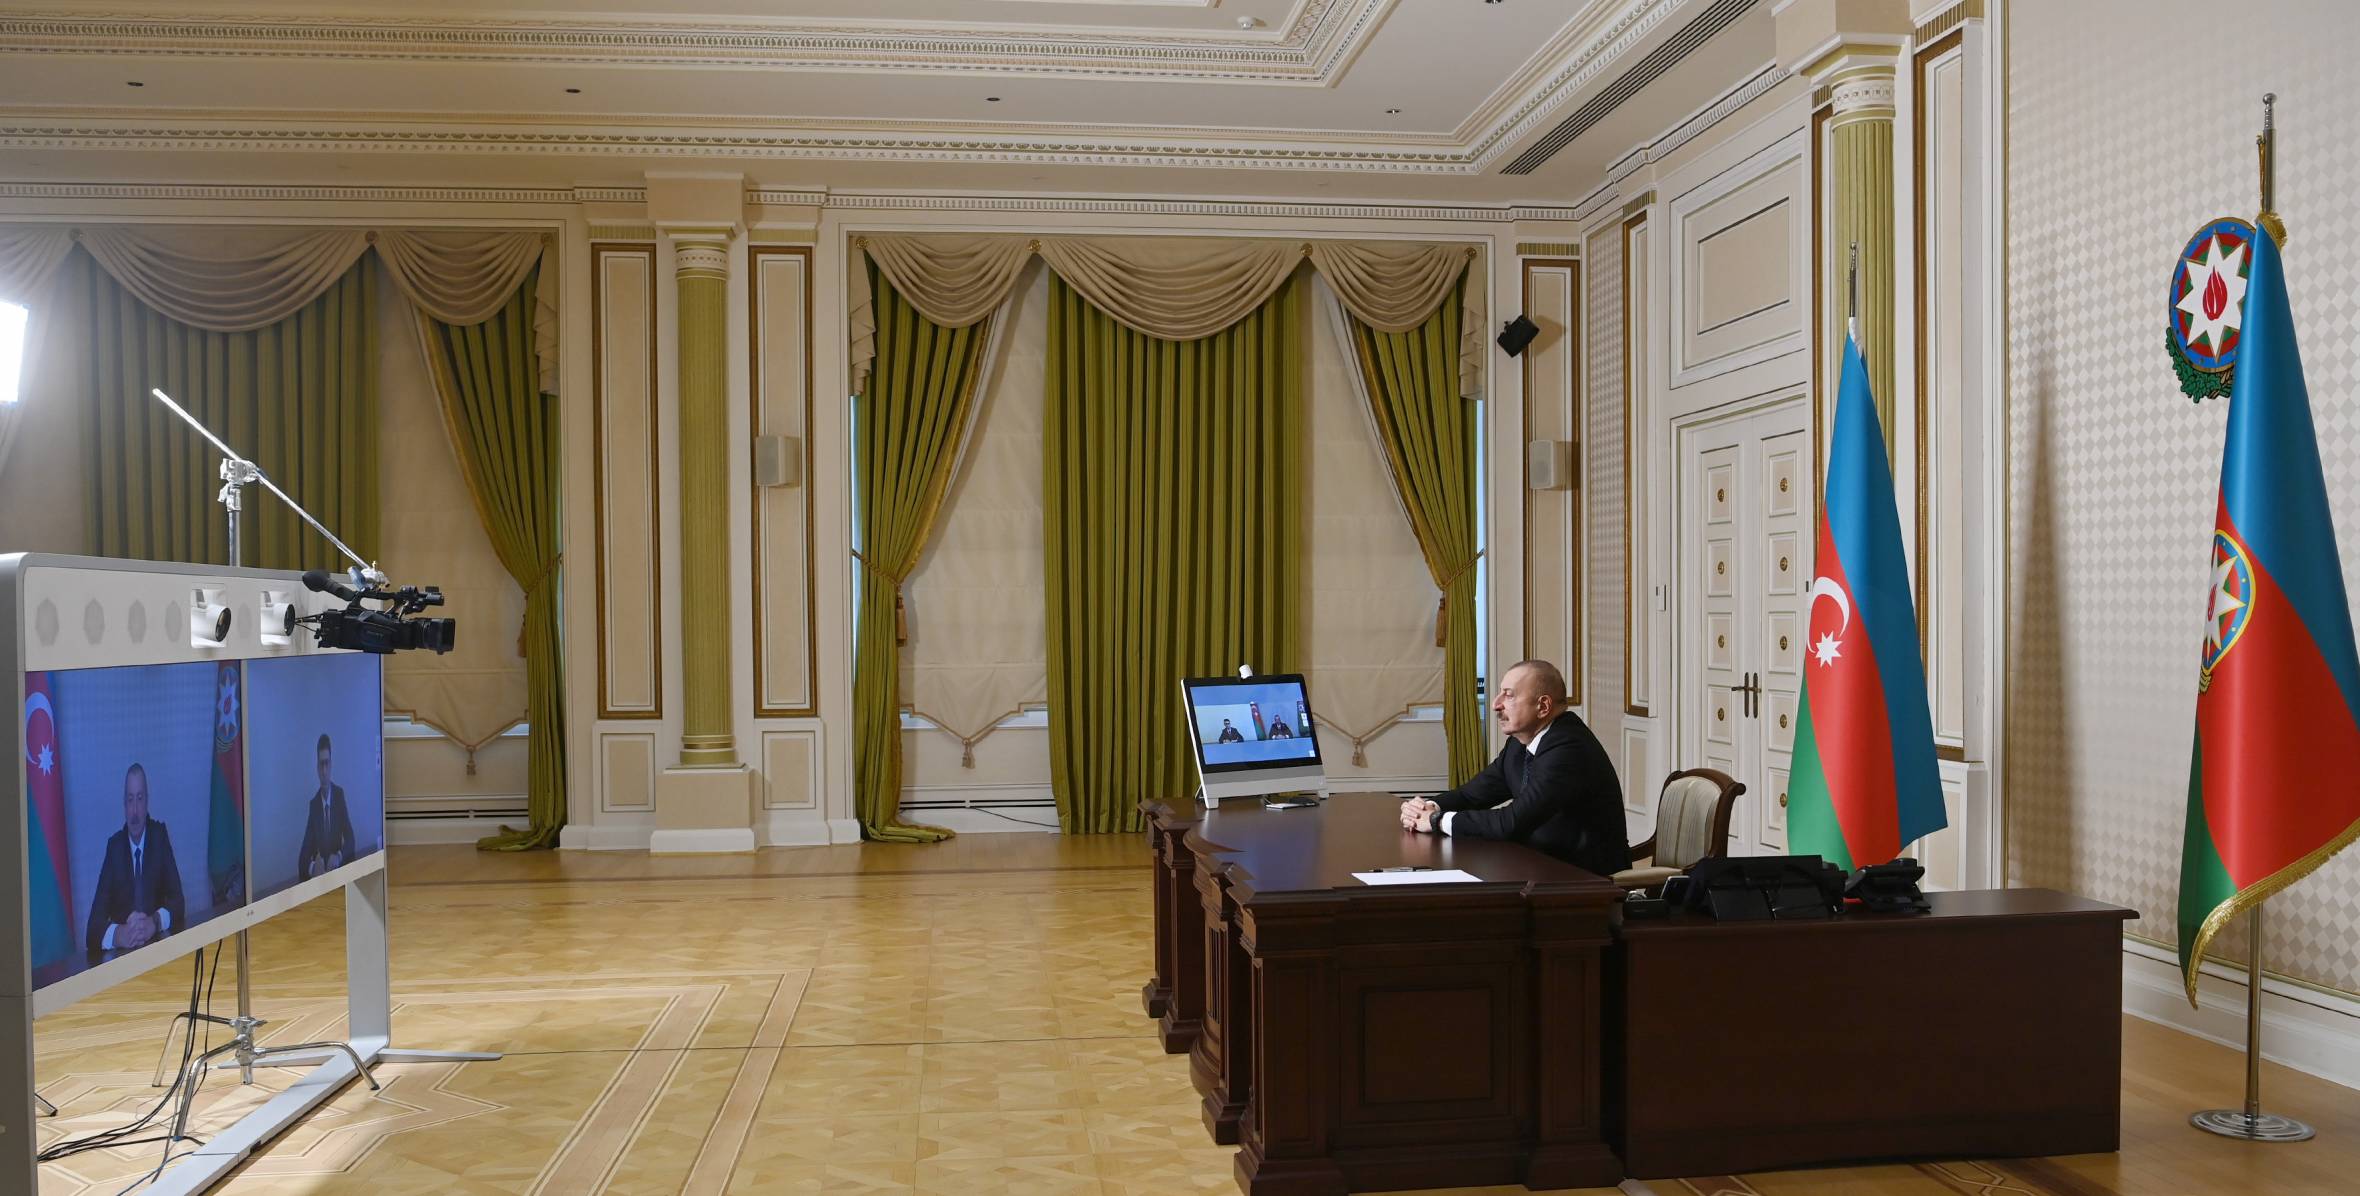 Ilham Aliyev received in video format Shahin Seyidzade on his appointment as Chairman of Board of “Icharishahar” State Historical and Architectural Reserve